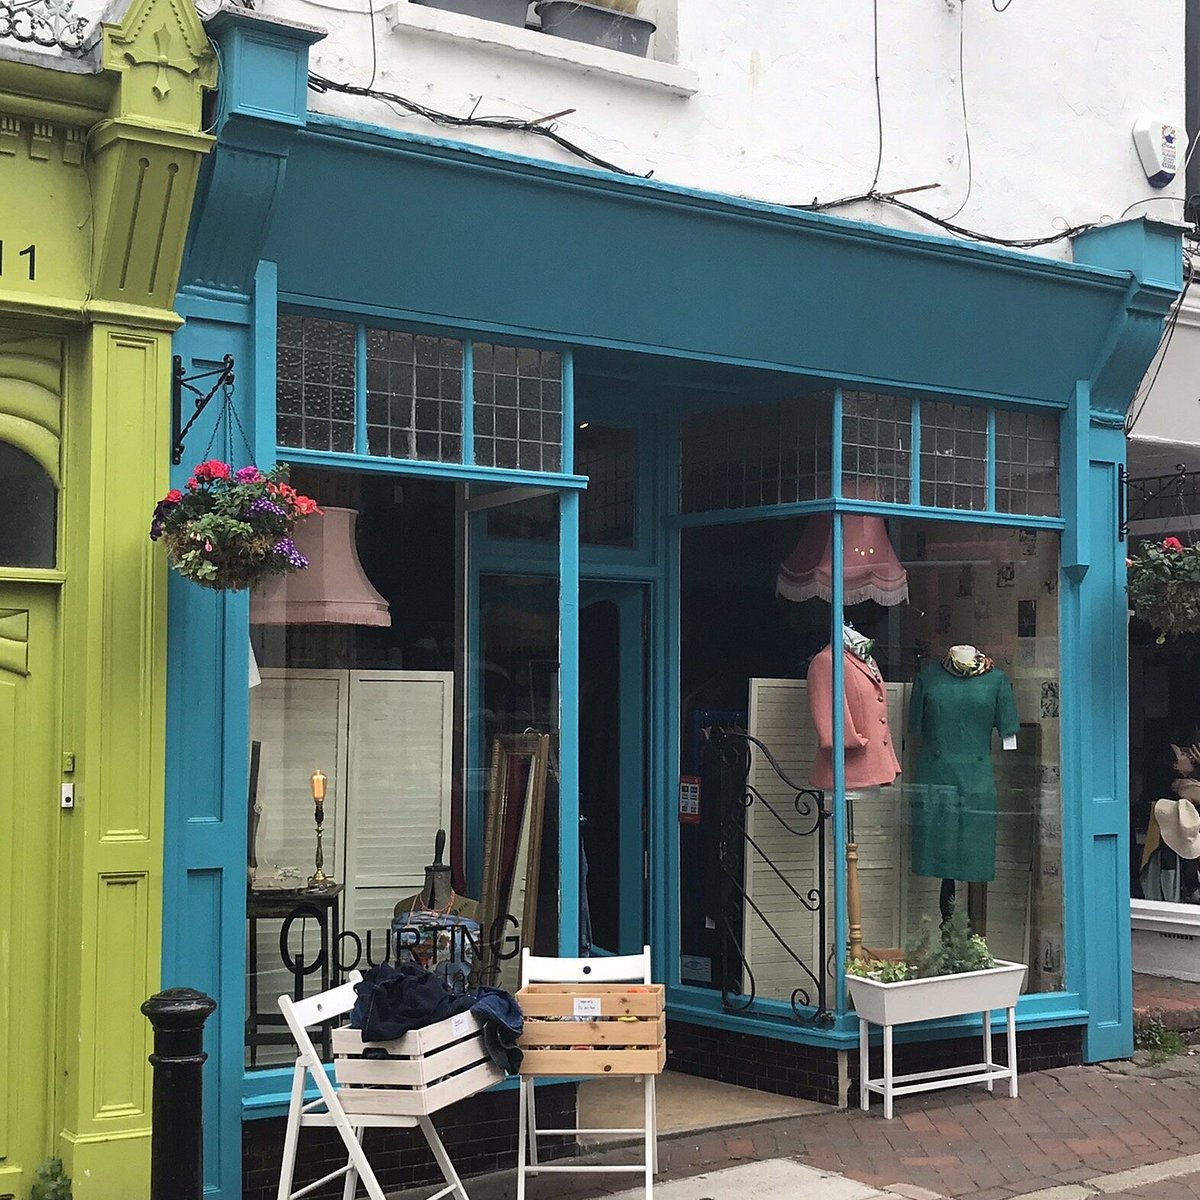 Courting Lily Vintage (Folkestone) - All You Need to Know BEFORE You Go